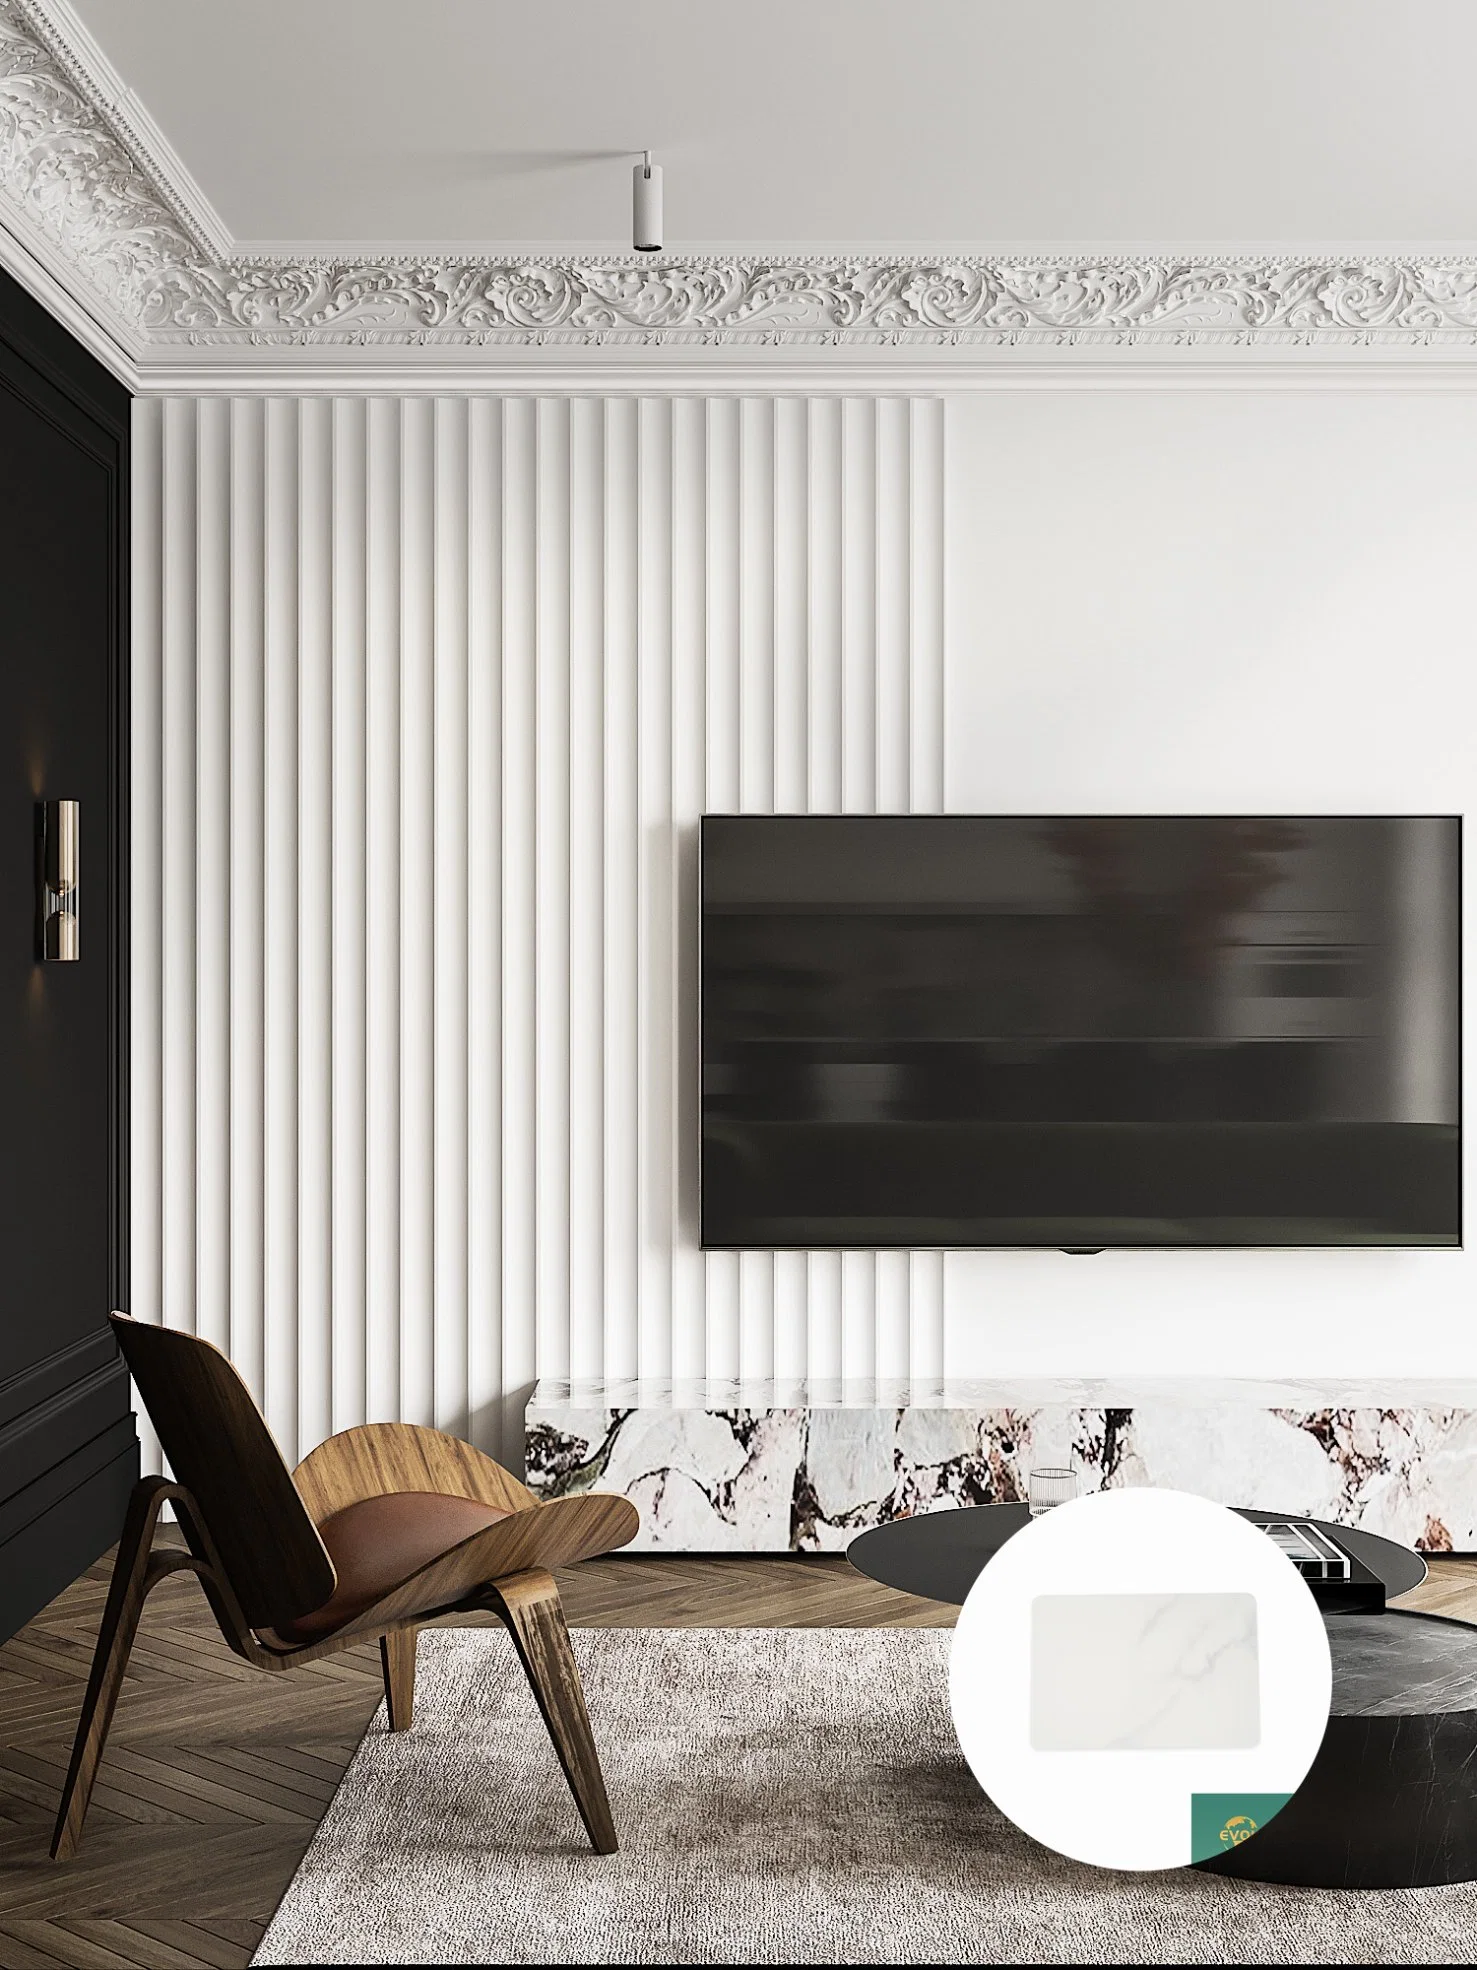 Evoke WPC Product From This Supplier. Wholesale/Supplier Interior Decorative Baboo Wood Veneer WPC Slat Paneling Fluted Wall Cladding